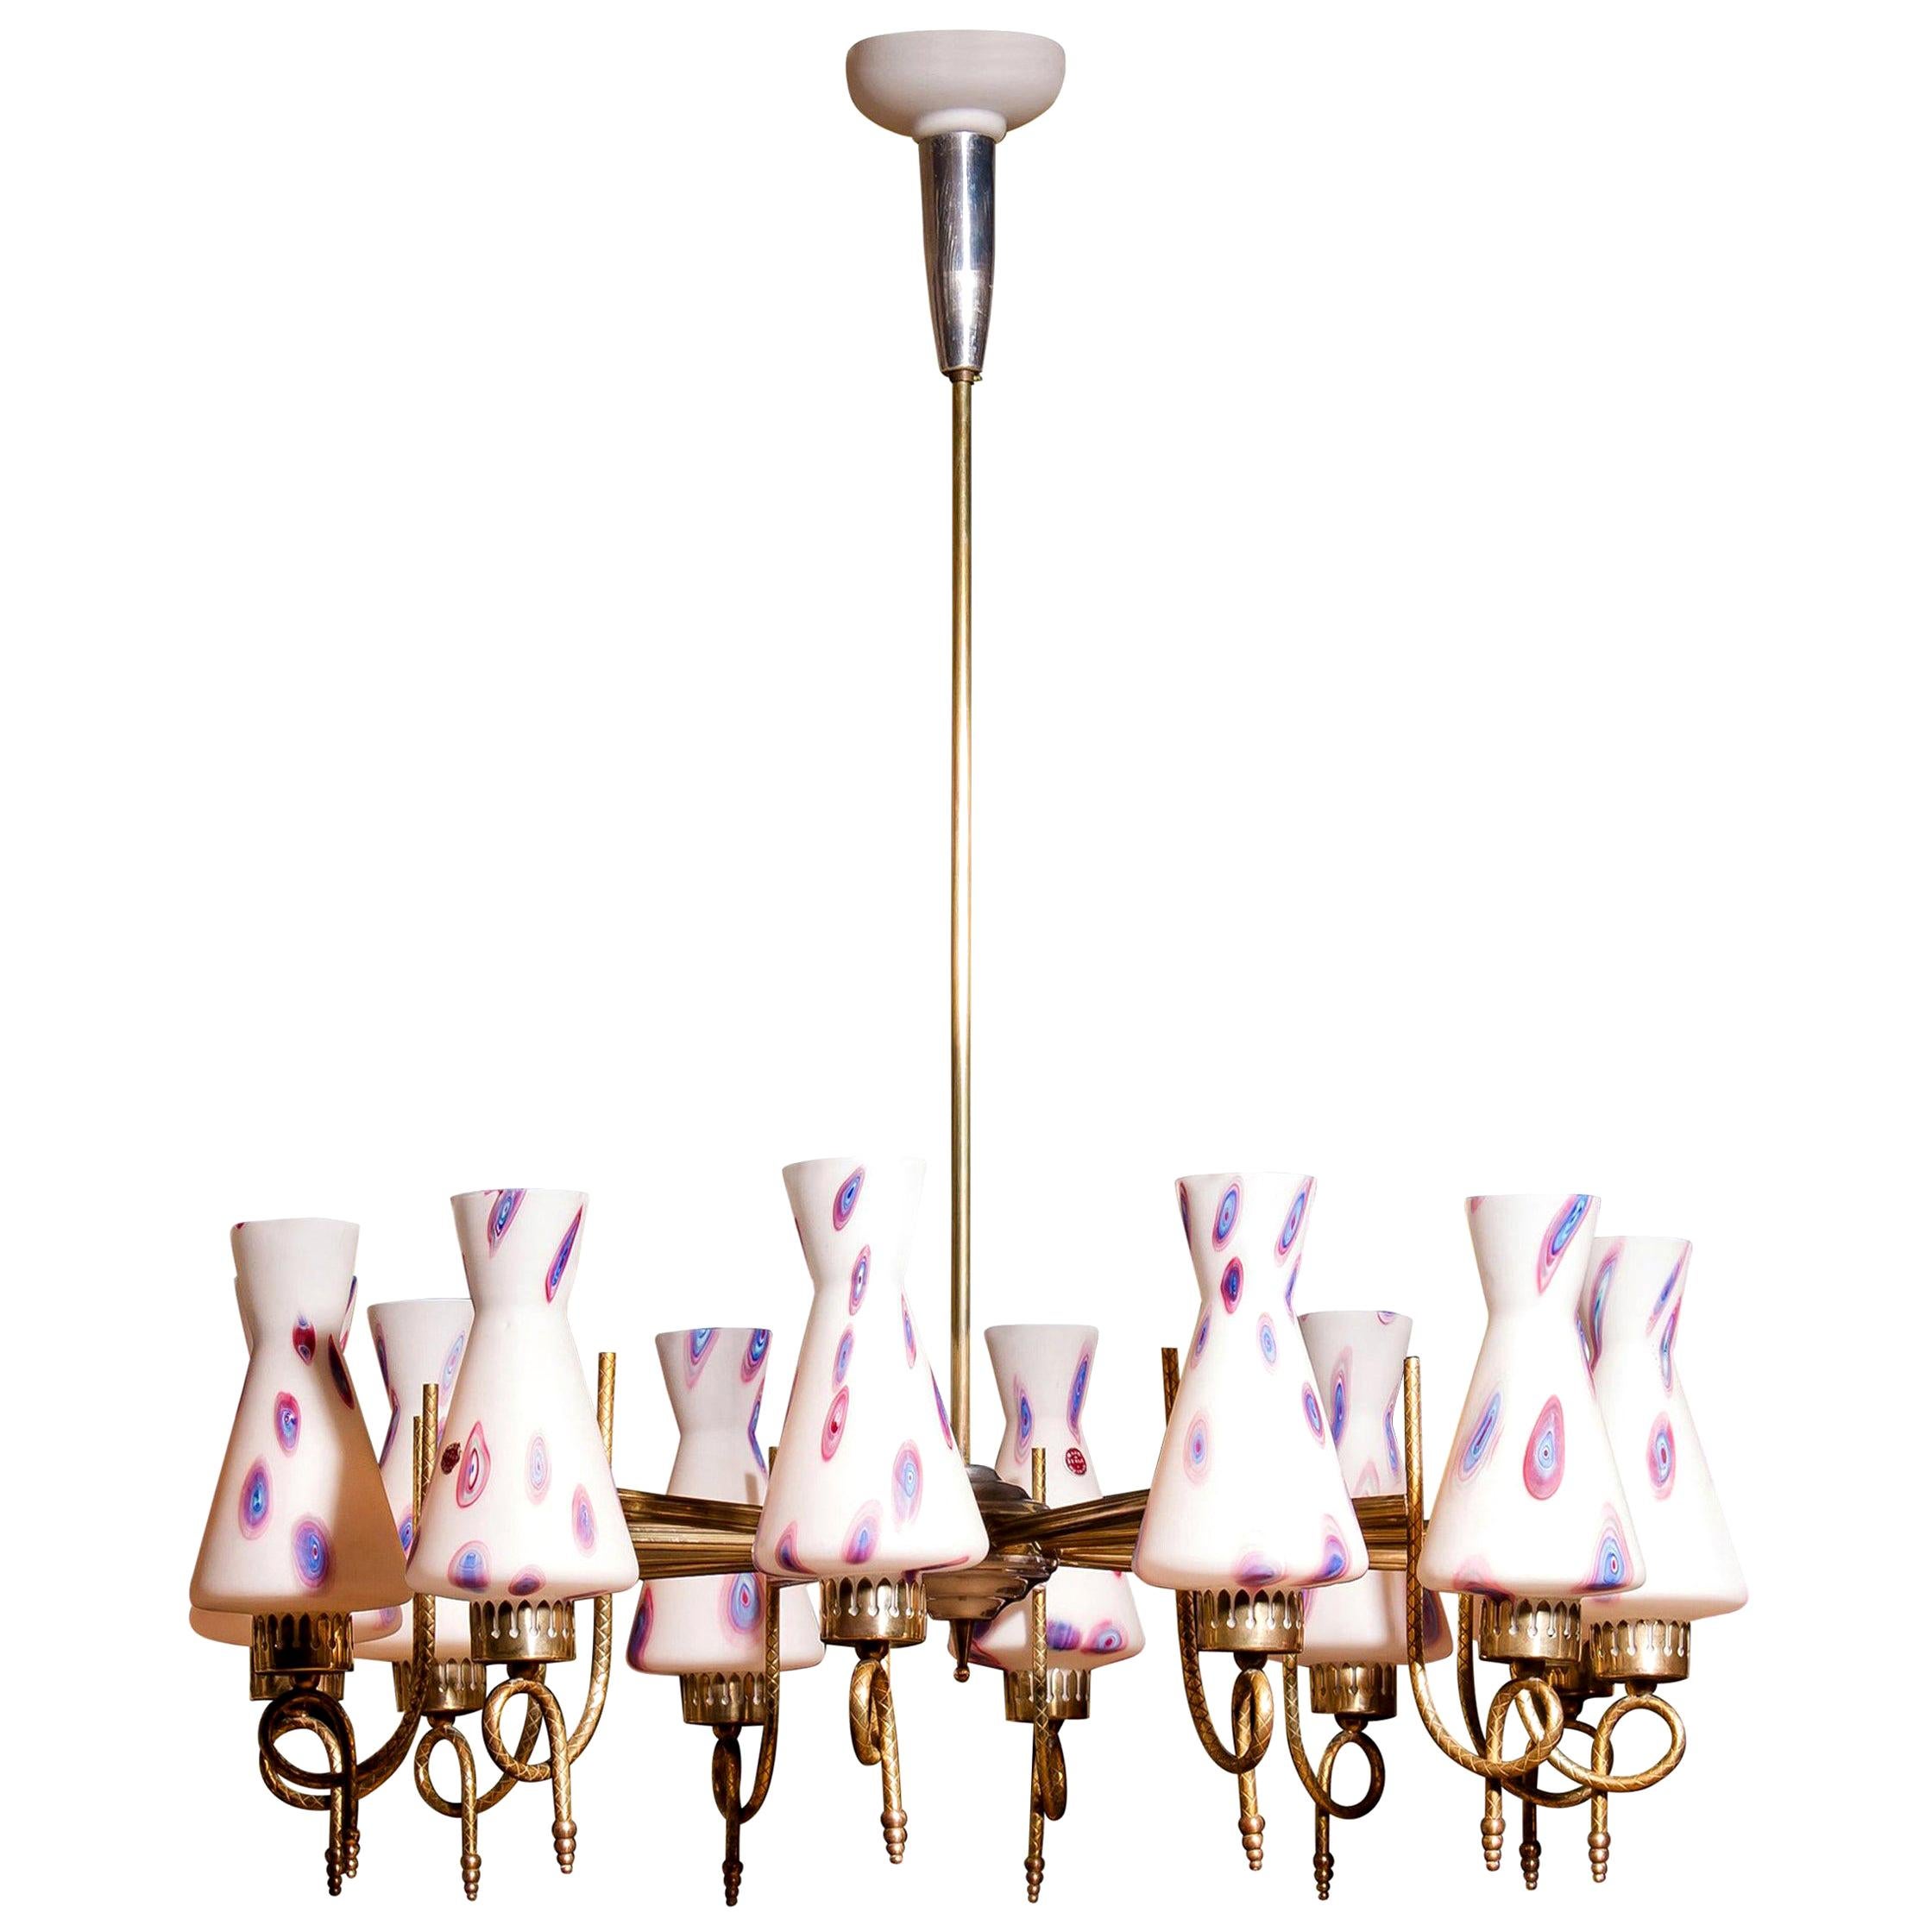 Magnificent large chandelier.
This lamp is made of a beautiful brass with polished aluminum shape with twelve white designed Murano glass shades and made by Stilnovo.
Dimensions: H 90 cm, ø 80 cm.
Technically 100%.